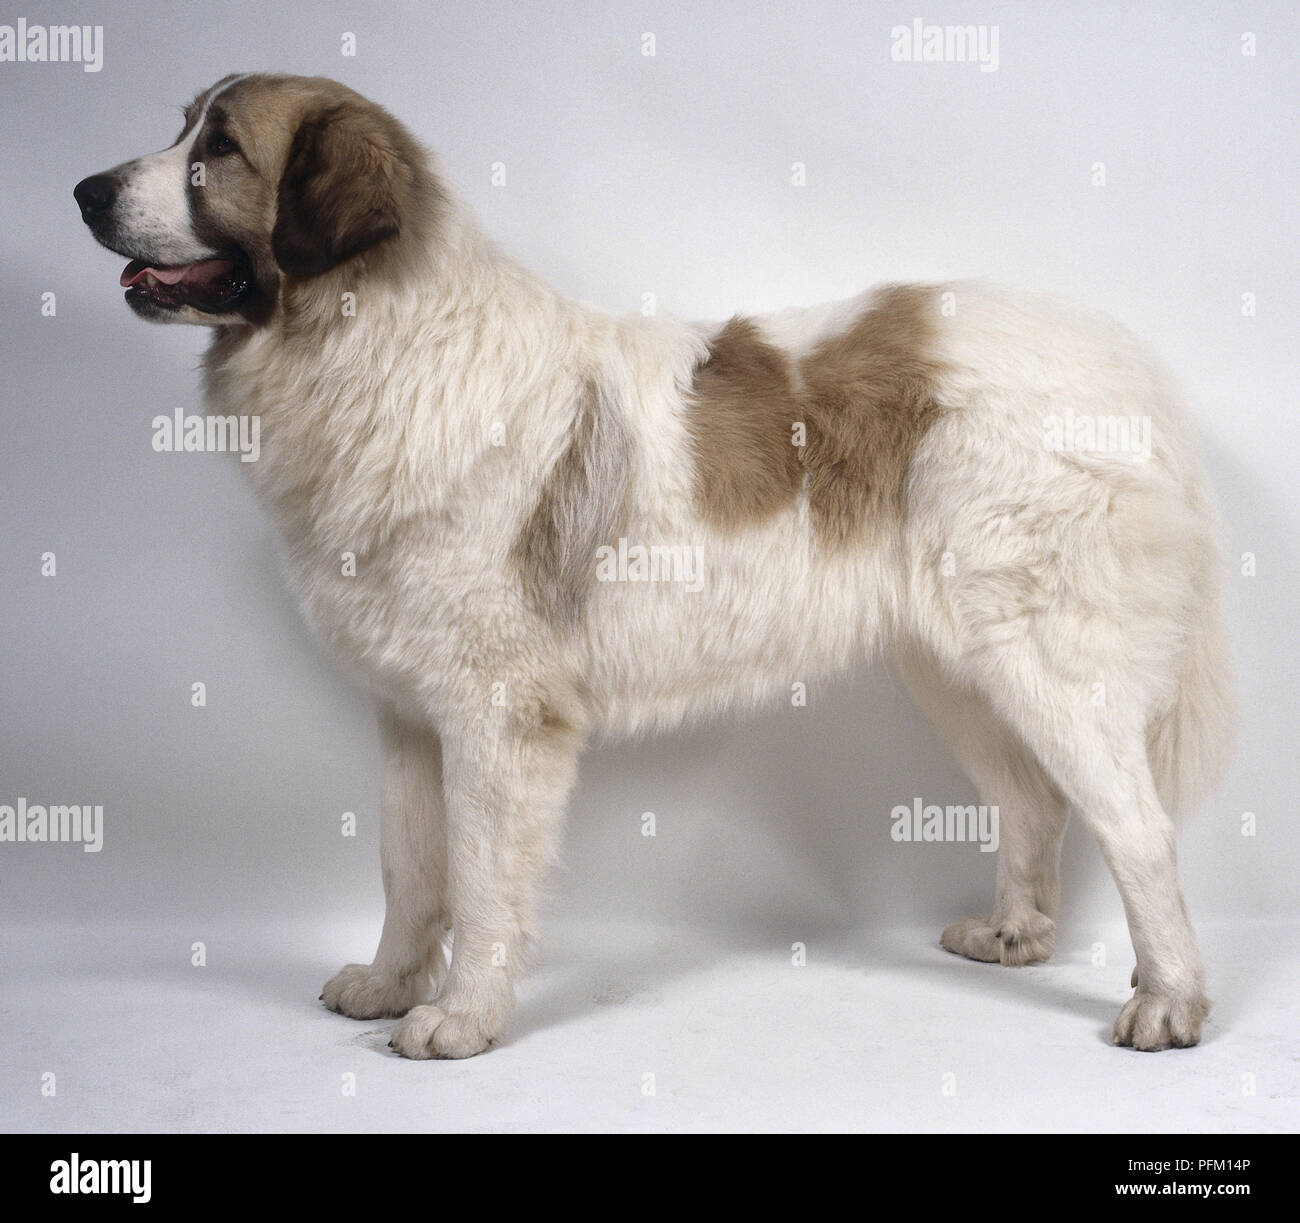 A heavyset brown and white Pyrenean mastiff with a thick coarse coat, on all fours, side-on Stock Photo